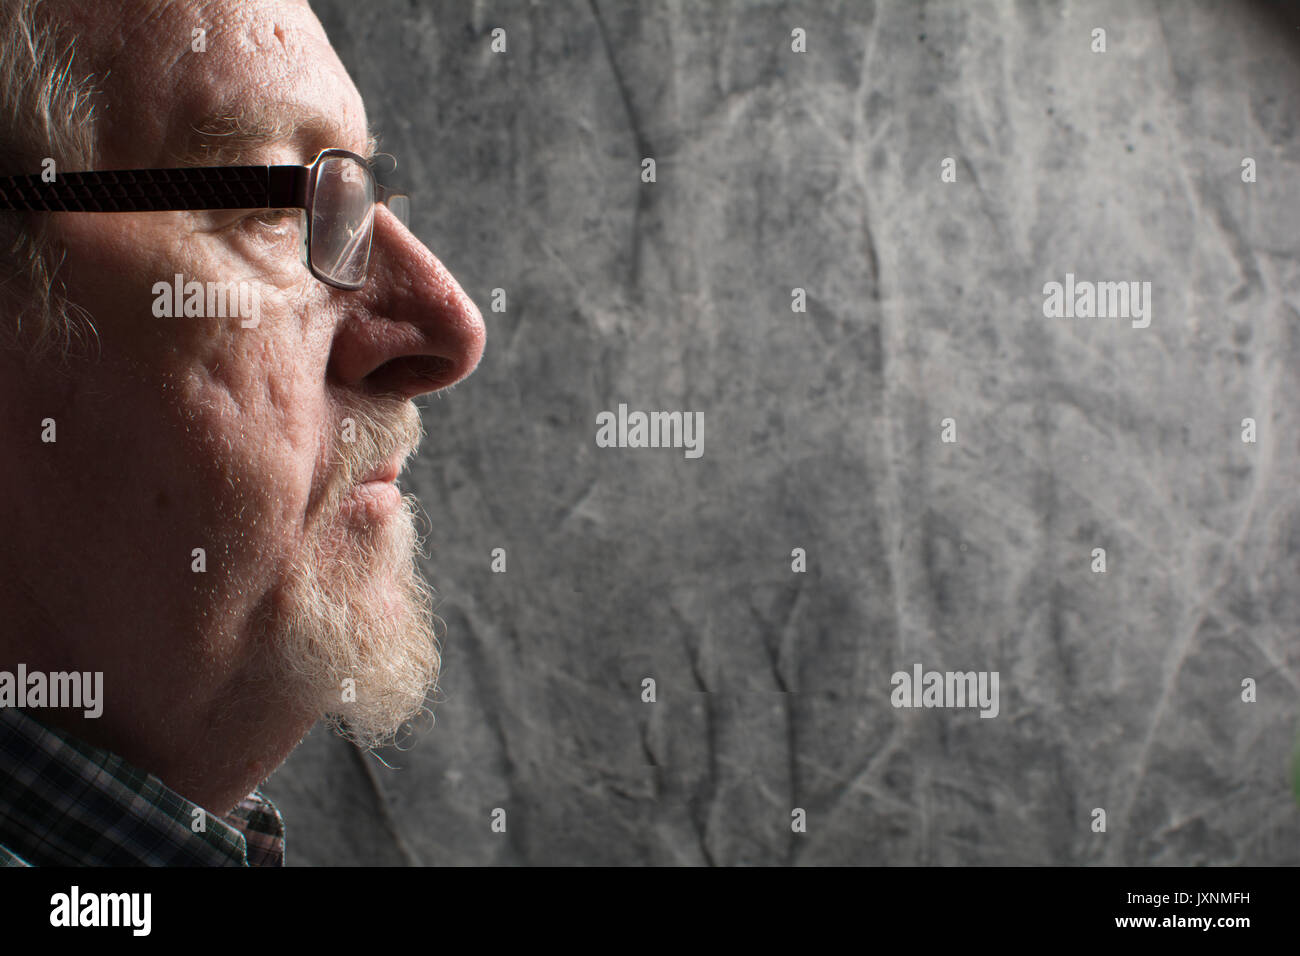 profile of an older man with a beard and spectacles, in vacant or pensive mood Stock Photo